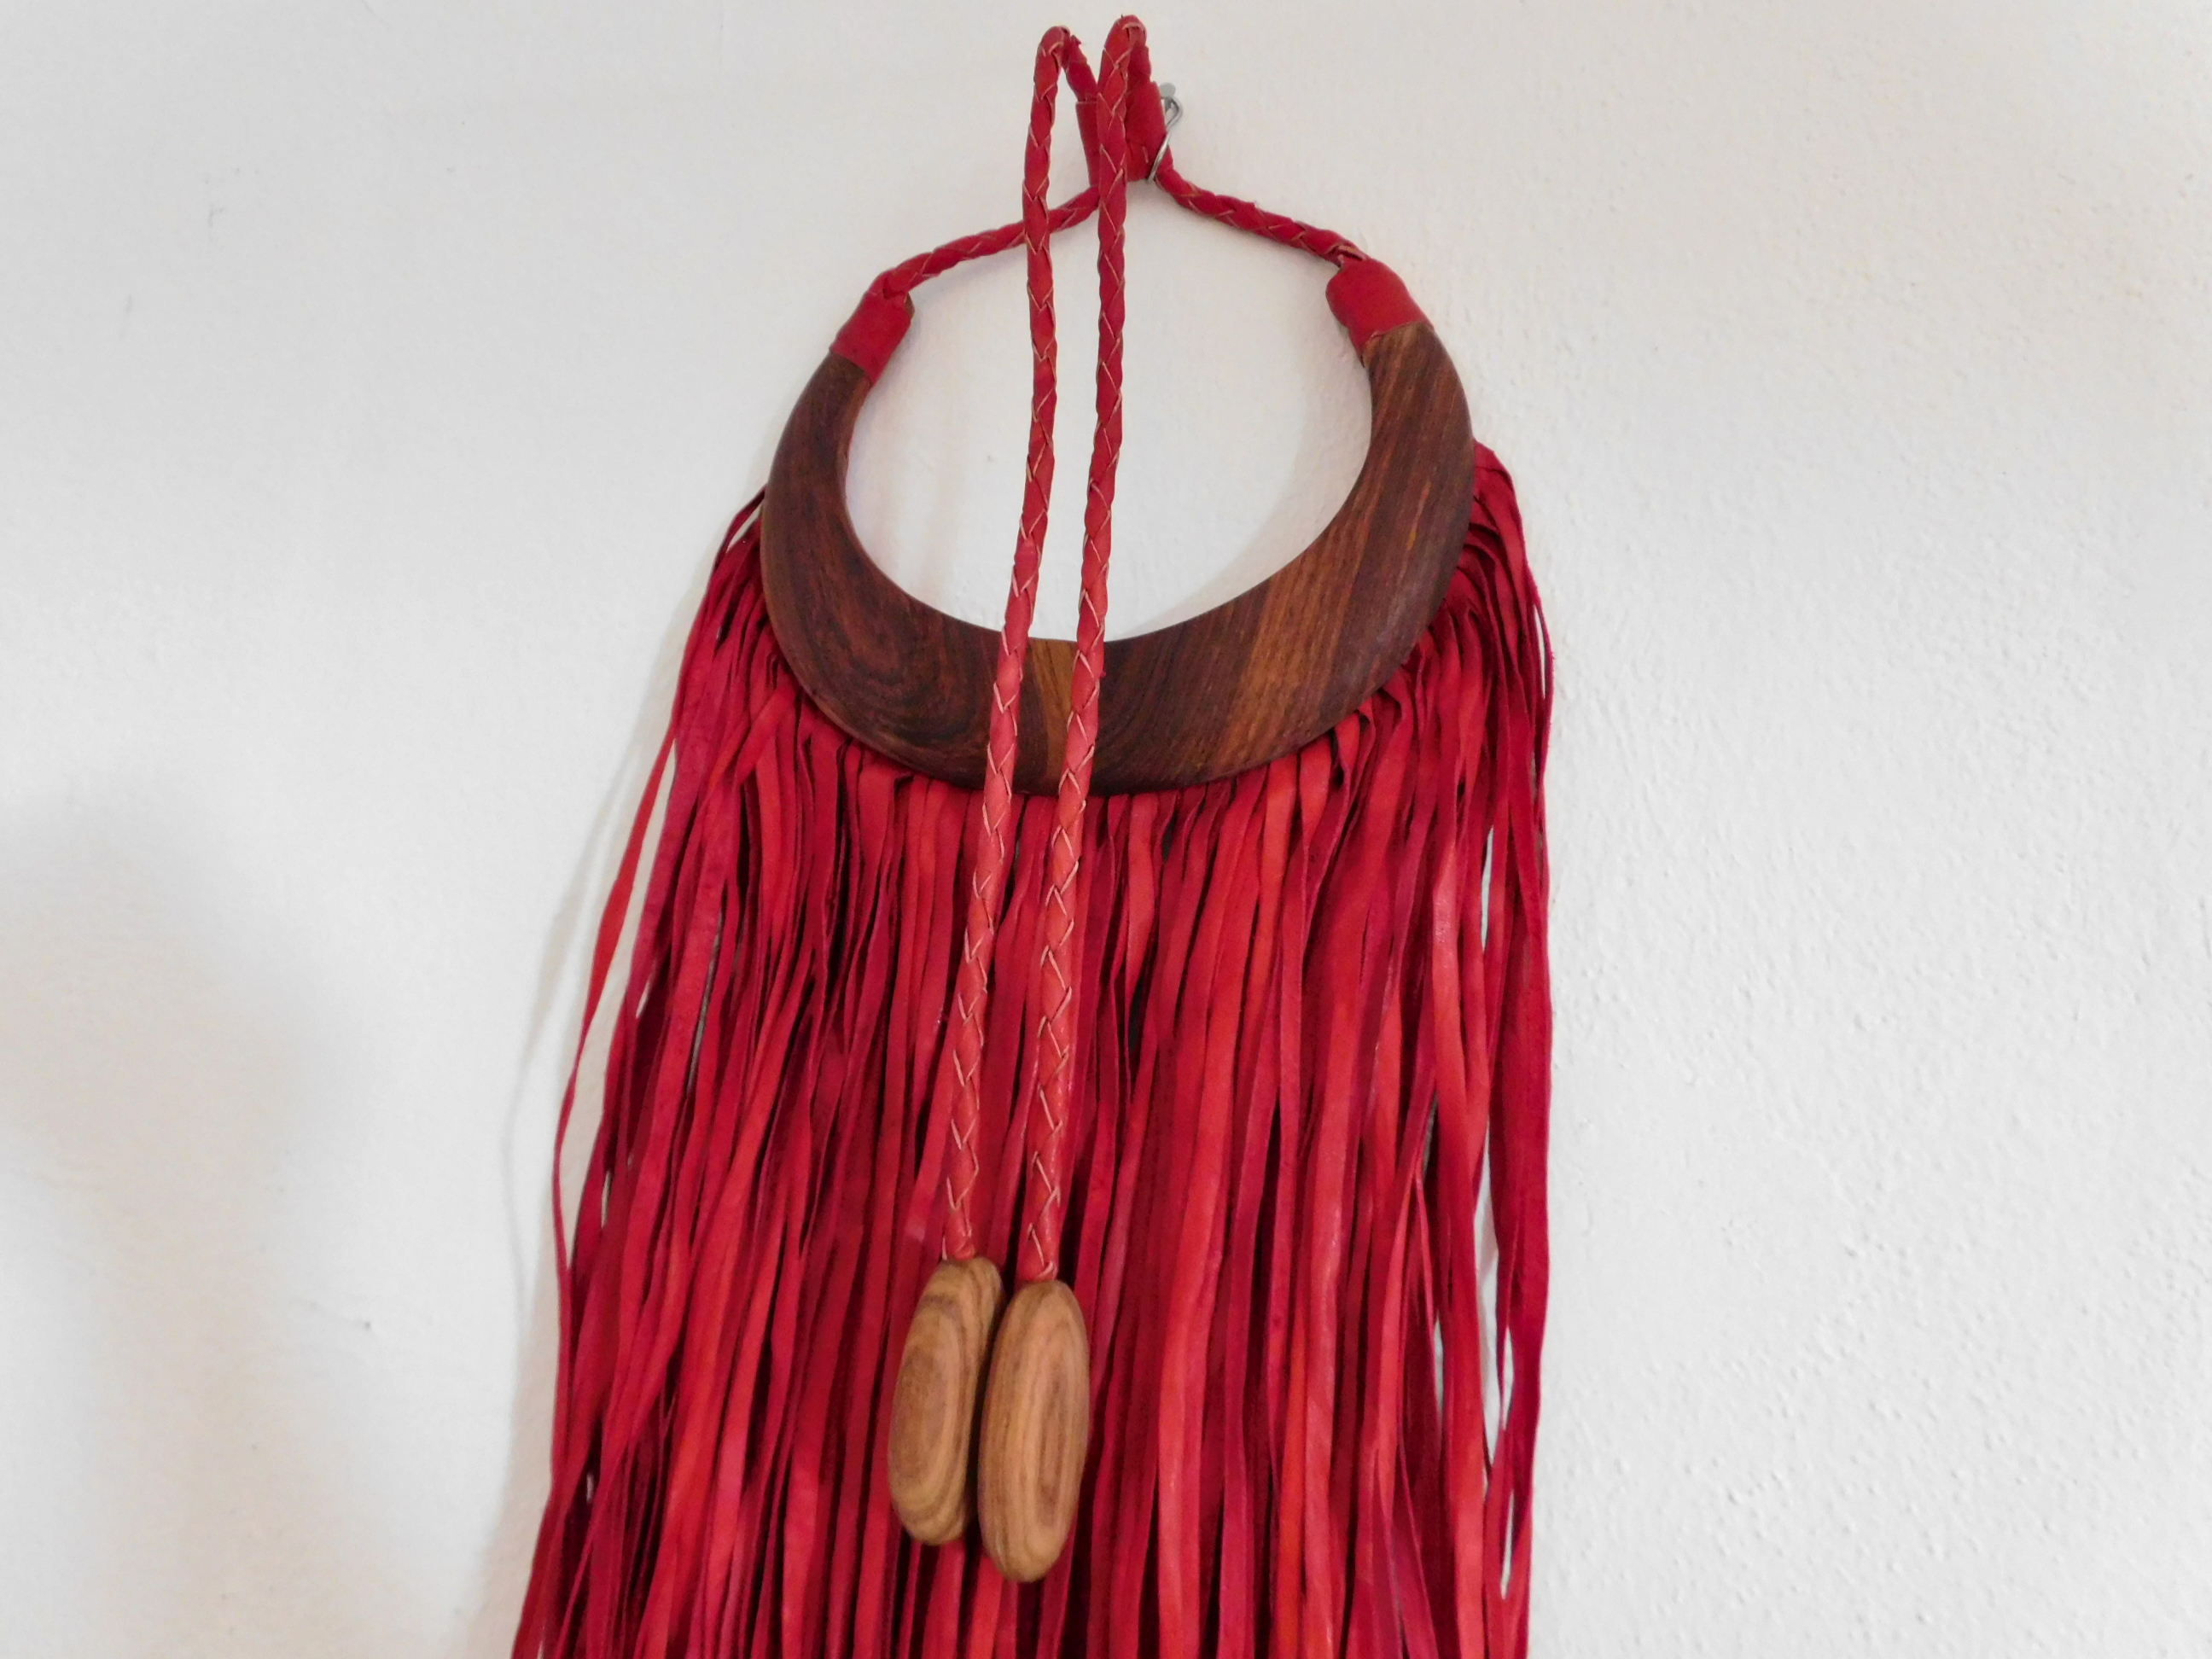 African decoration statement piece made of red leather fringes and wood